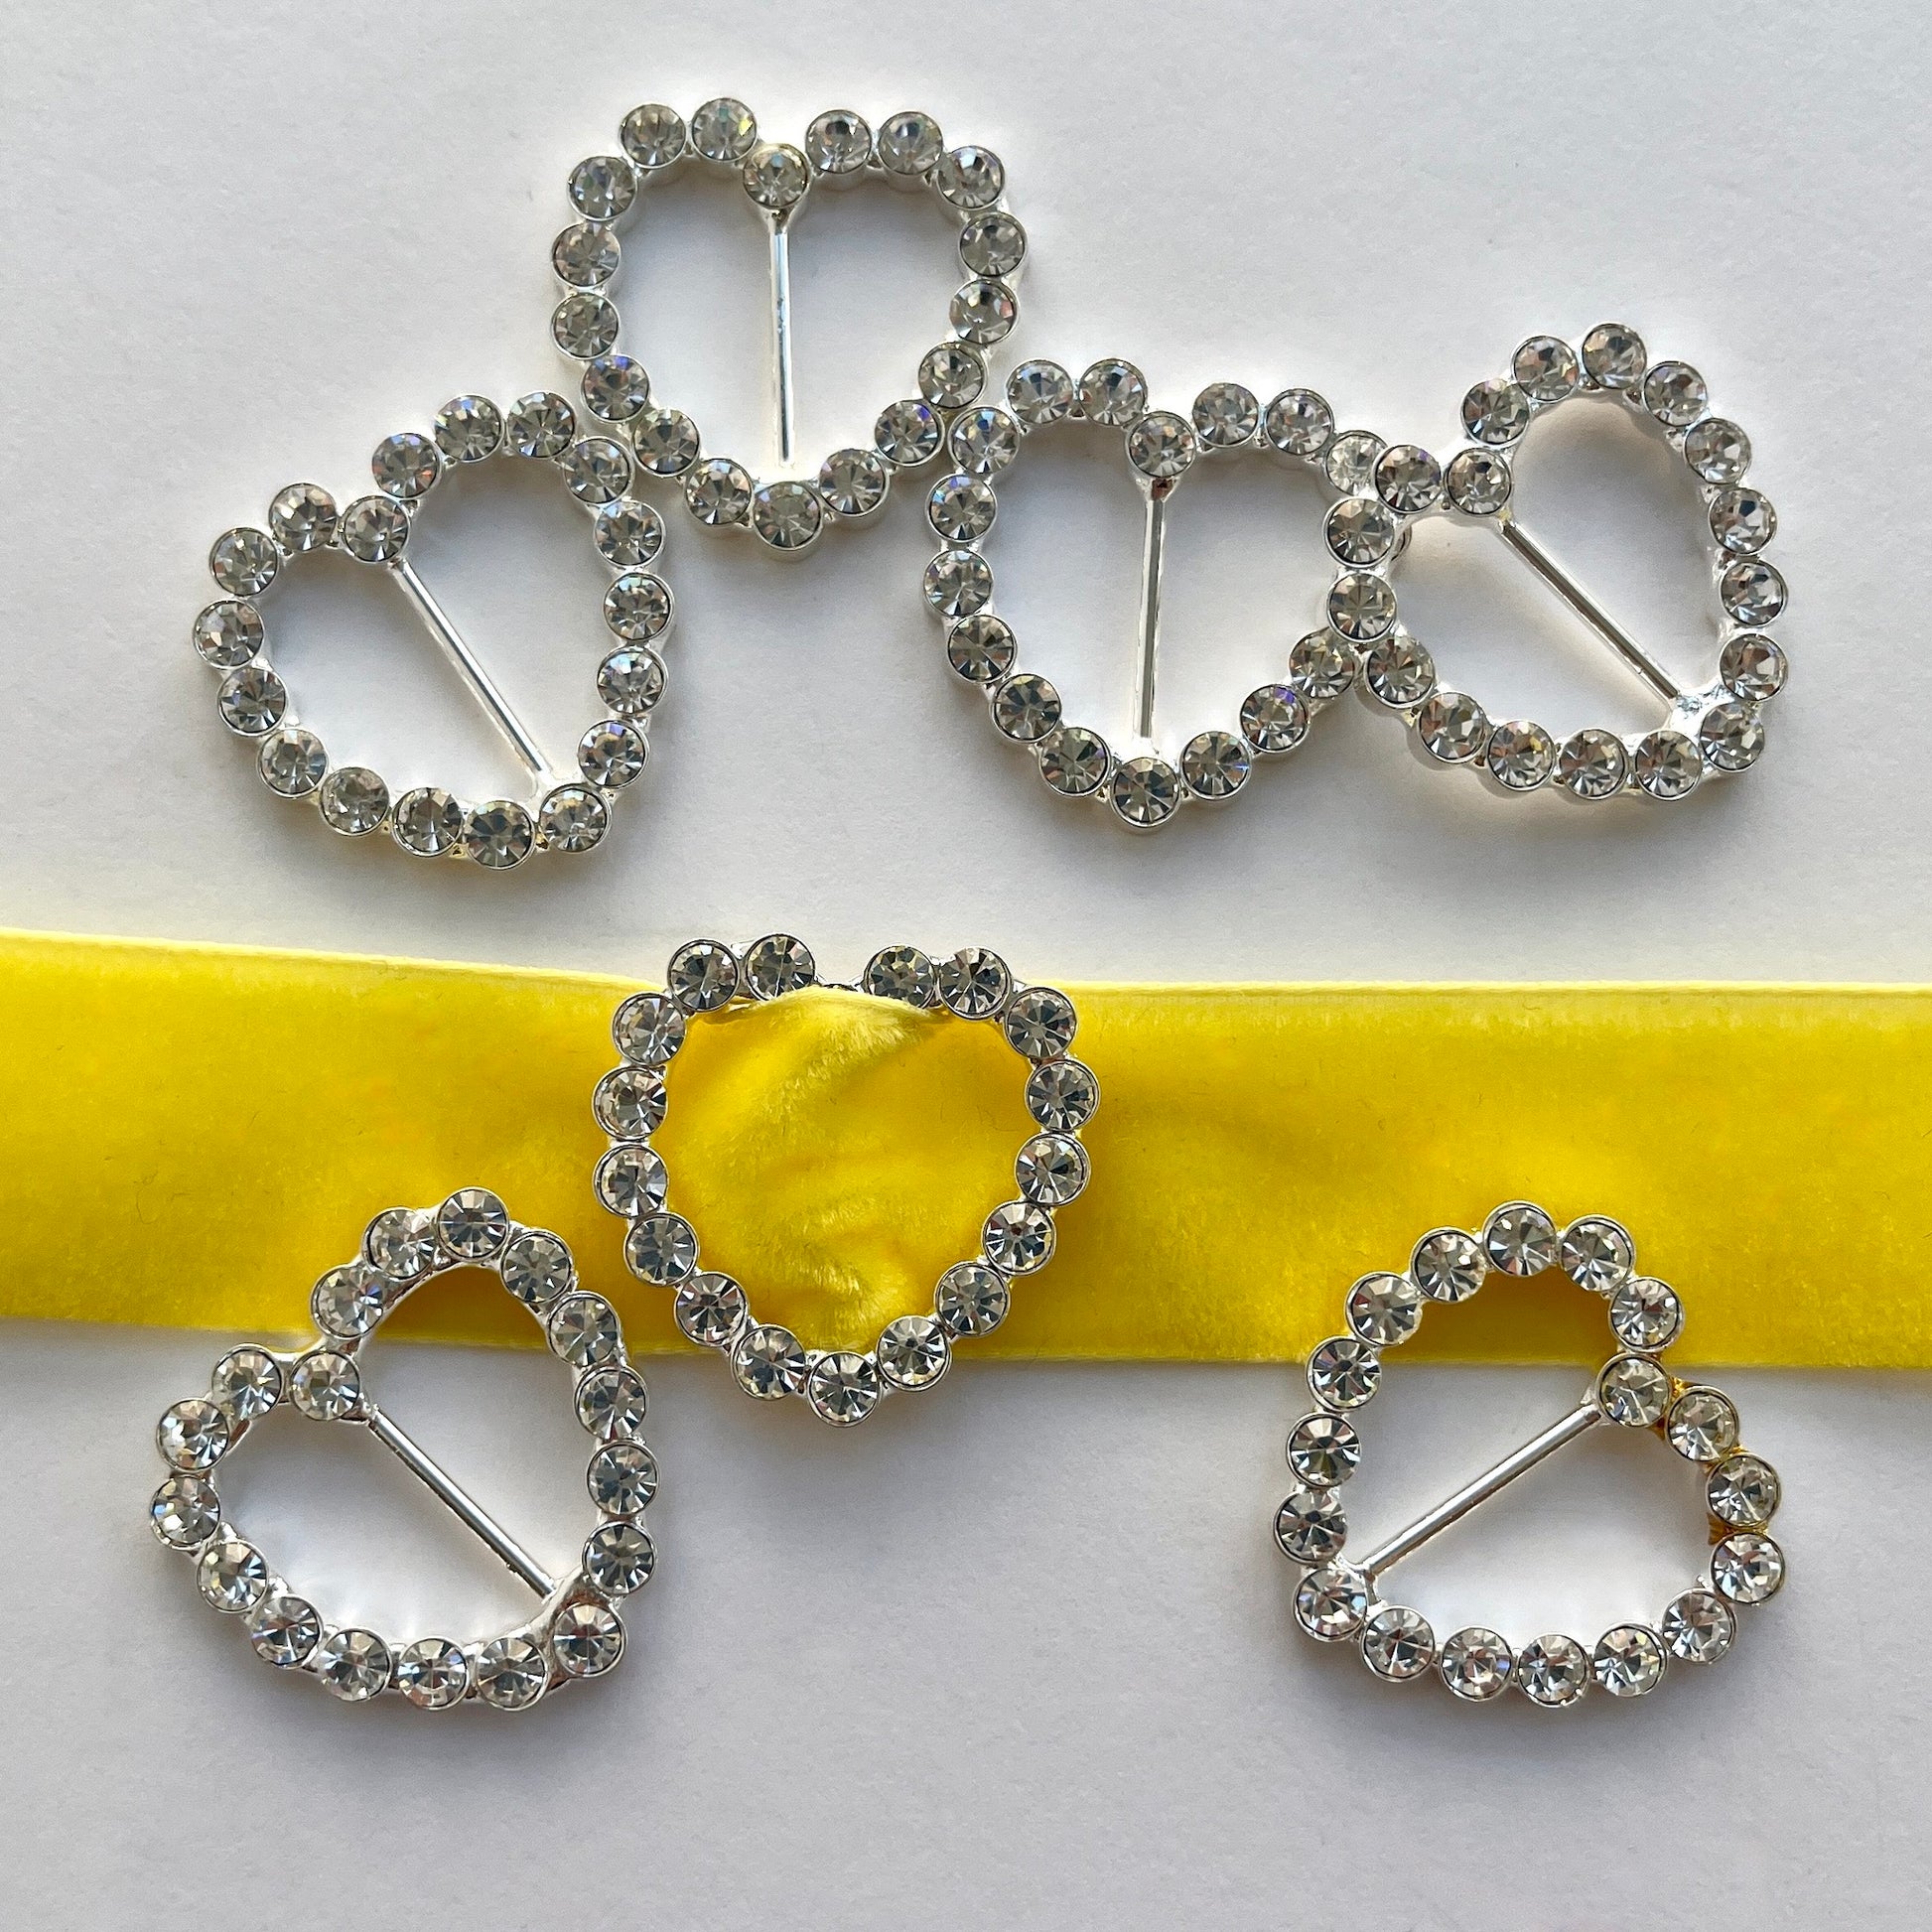 Lovely, high quality, rhinestone crystal slider buckles. Easy to use, just slide onto a ribbon or a strap to add sparkle to dress straps, bags. Perfect for a spot of DIY to embellish wedding invitations, wedding favours, napkin rings and arts and craft projects. Shown on 1cm (⅜”) wide velvet ribbon. 